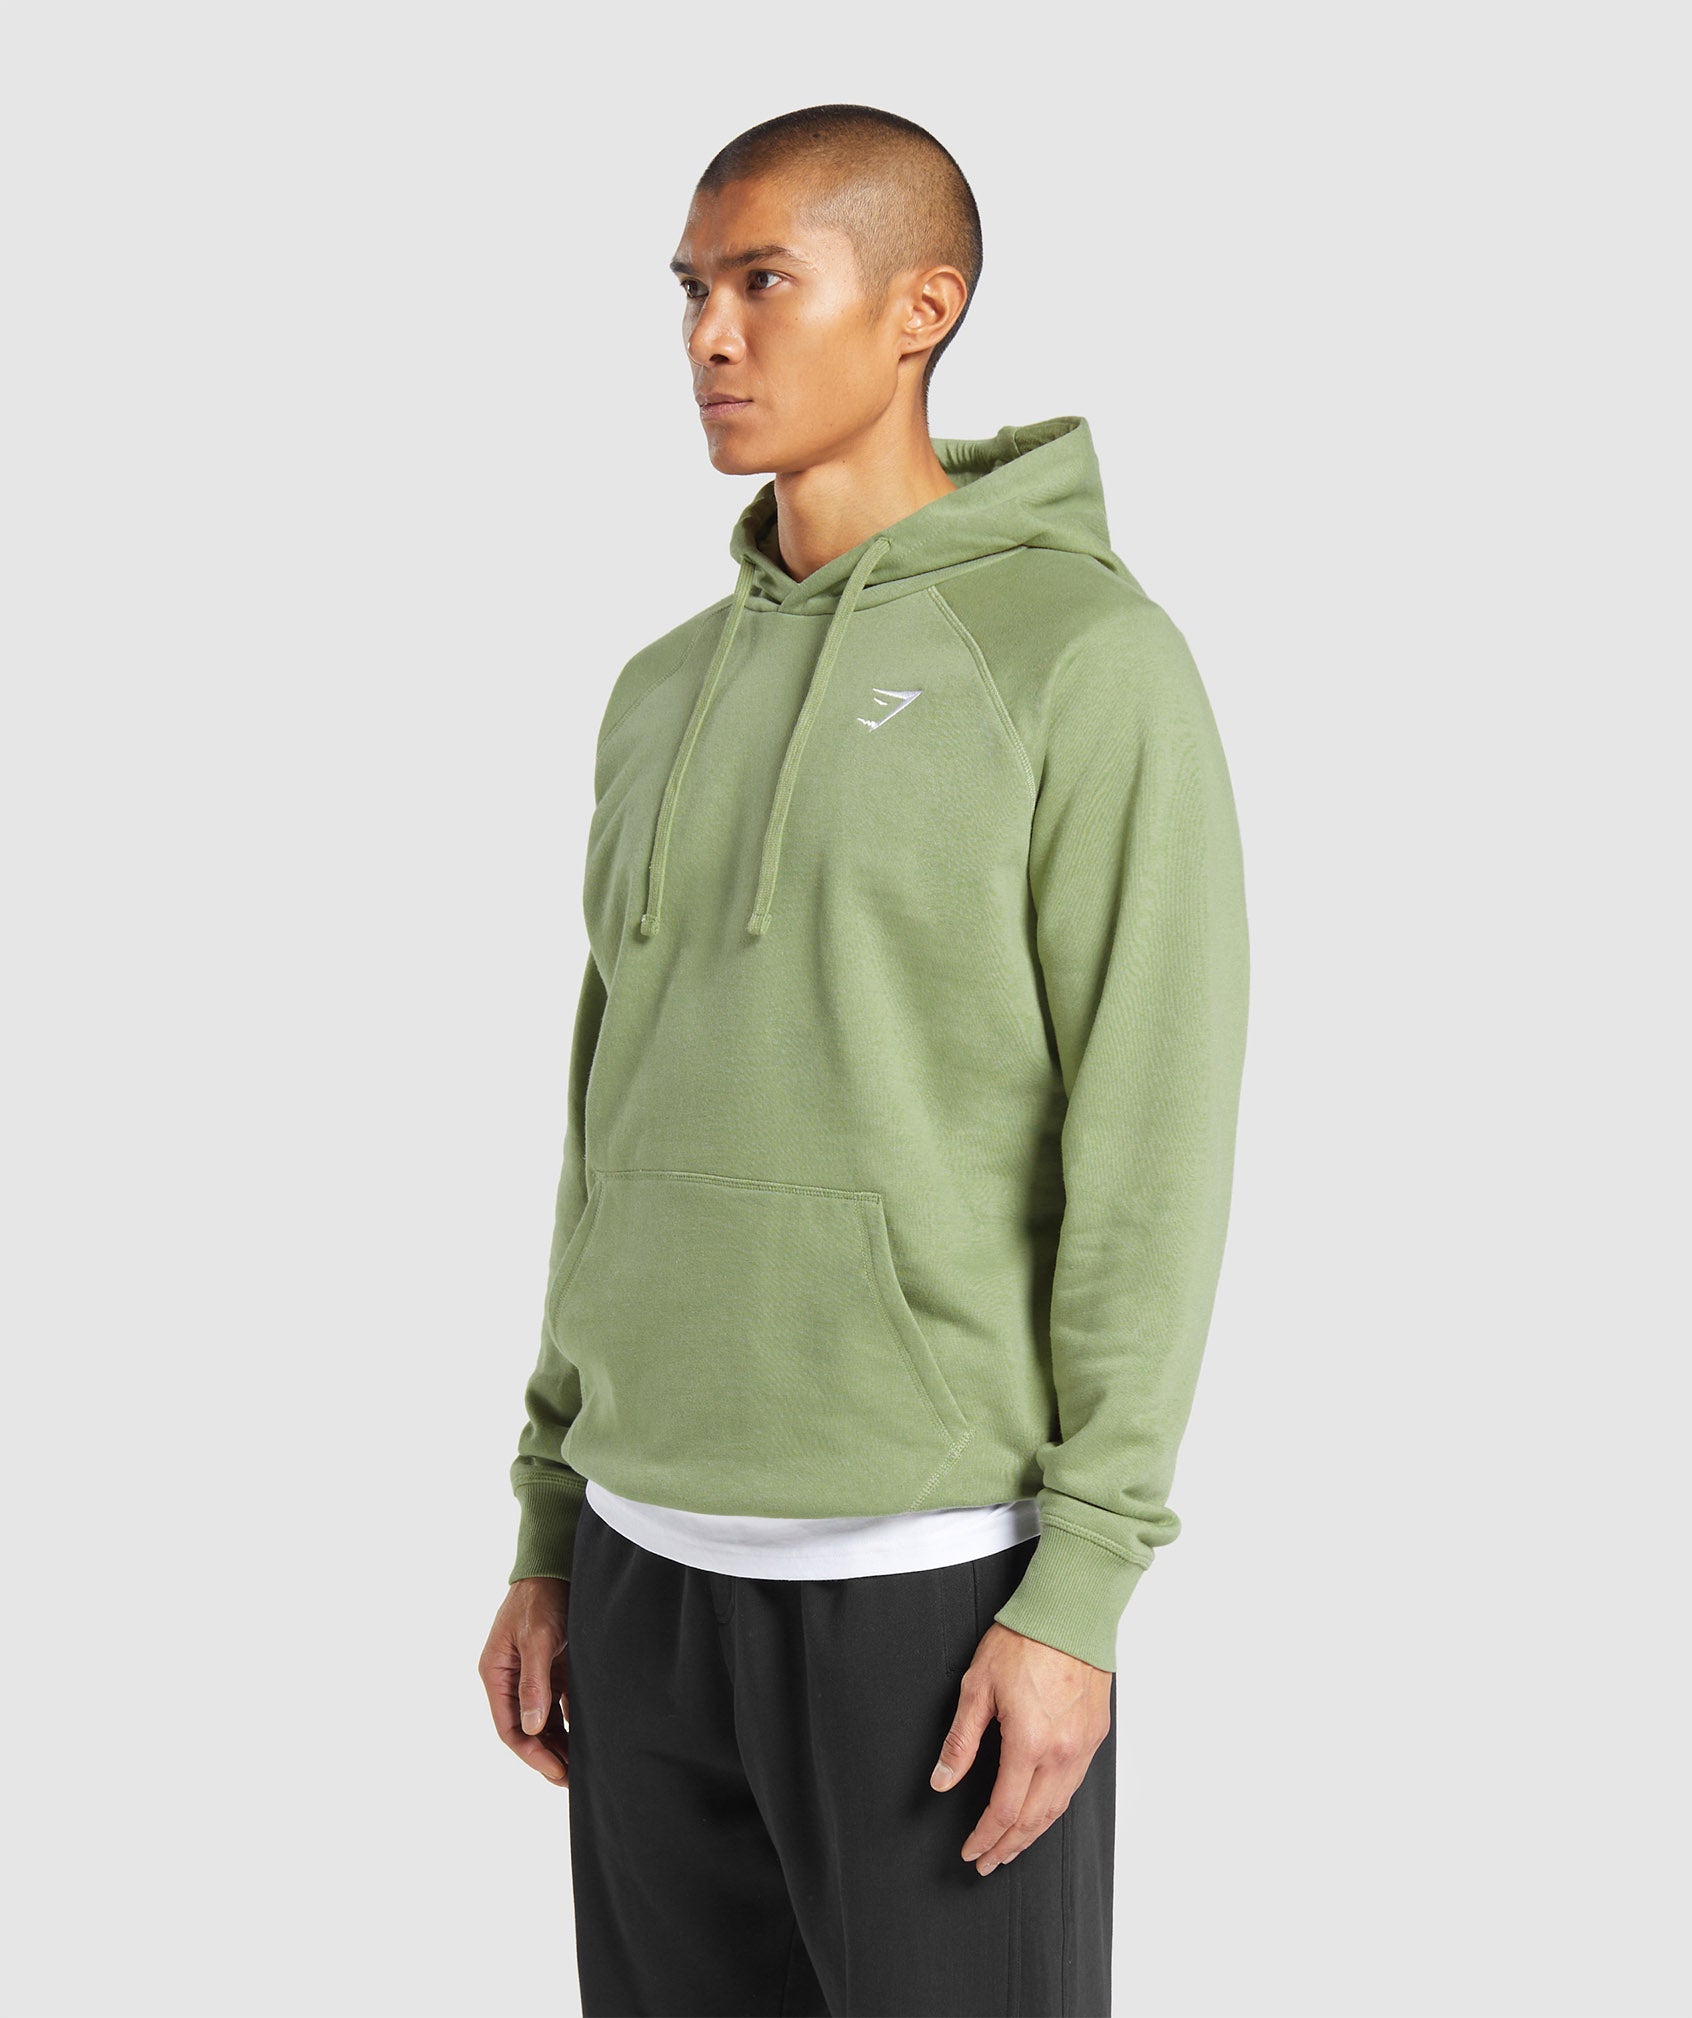 Crest Hoodie in Natural Sage Green - view 3